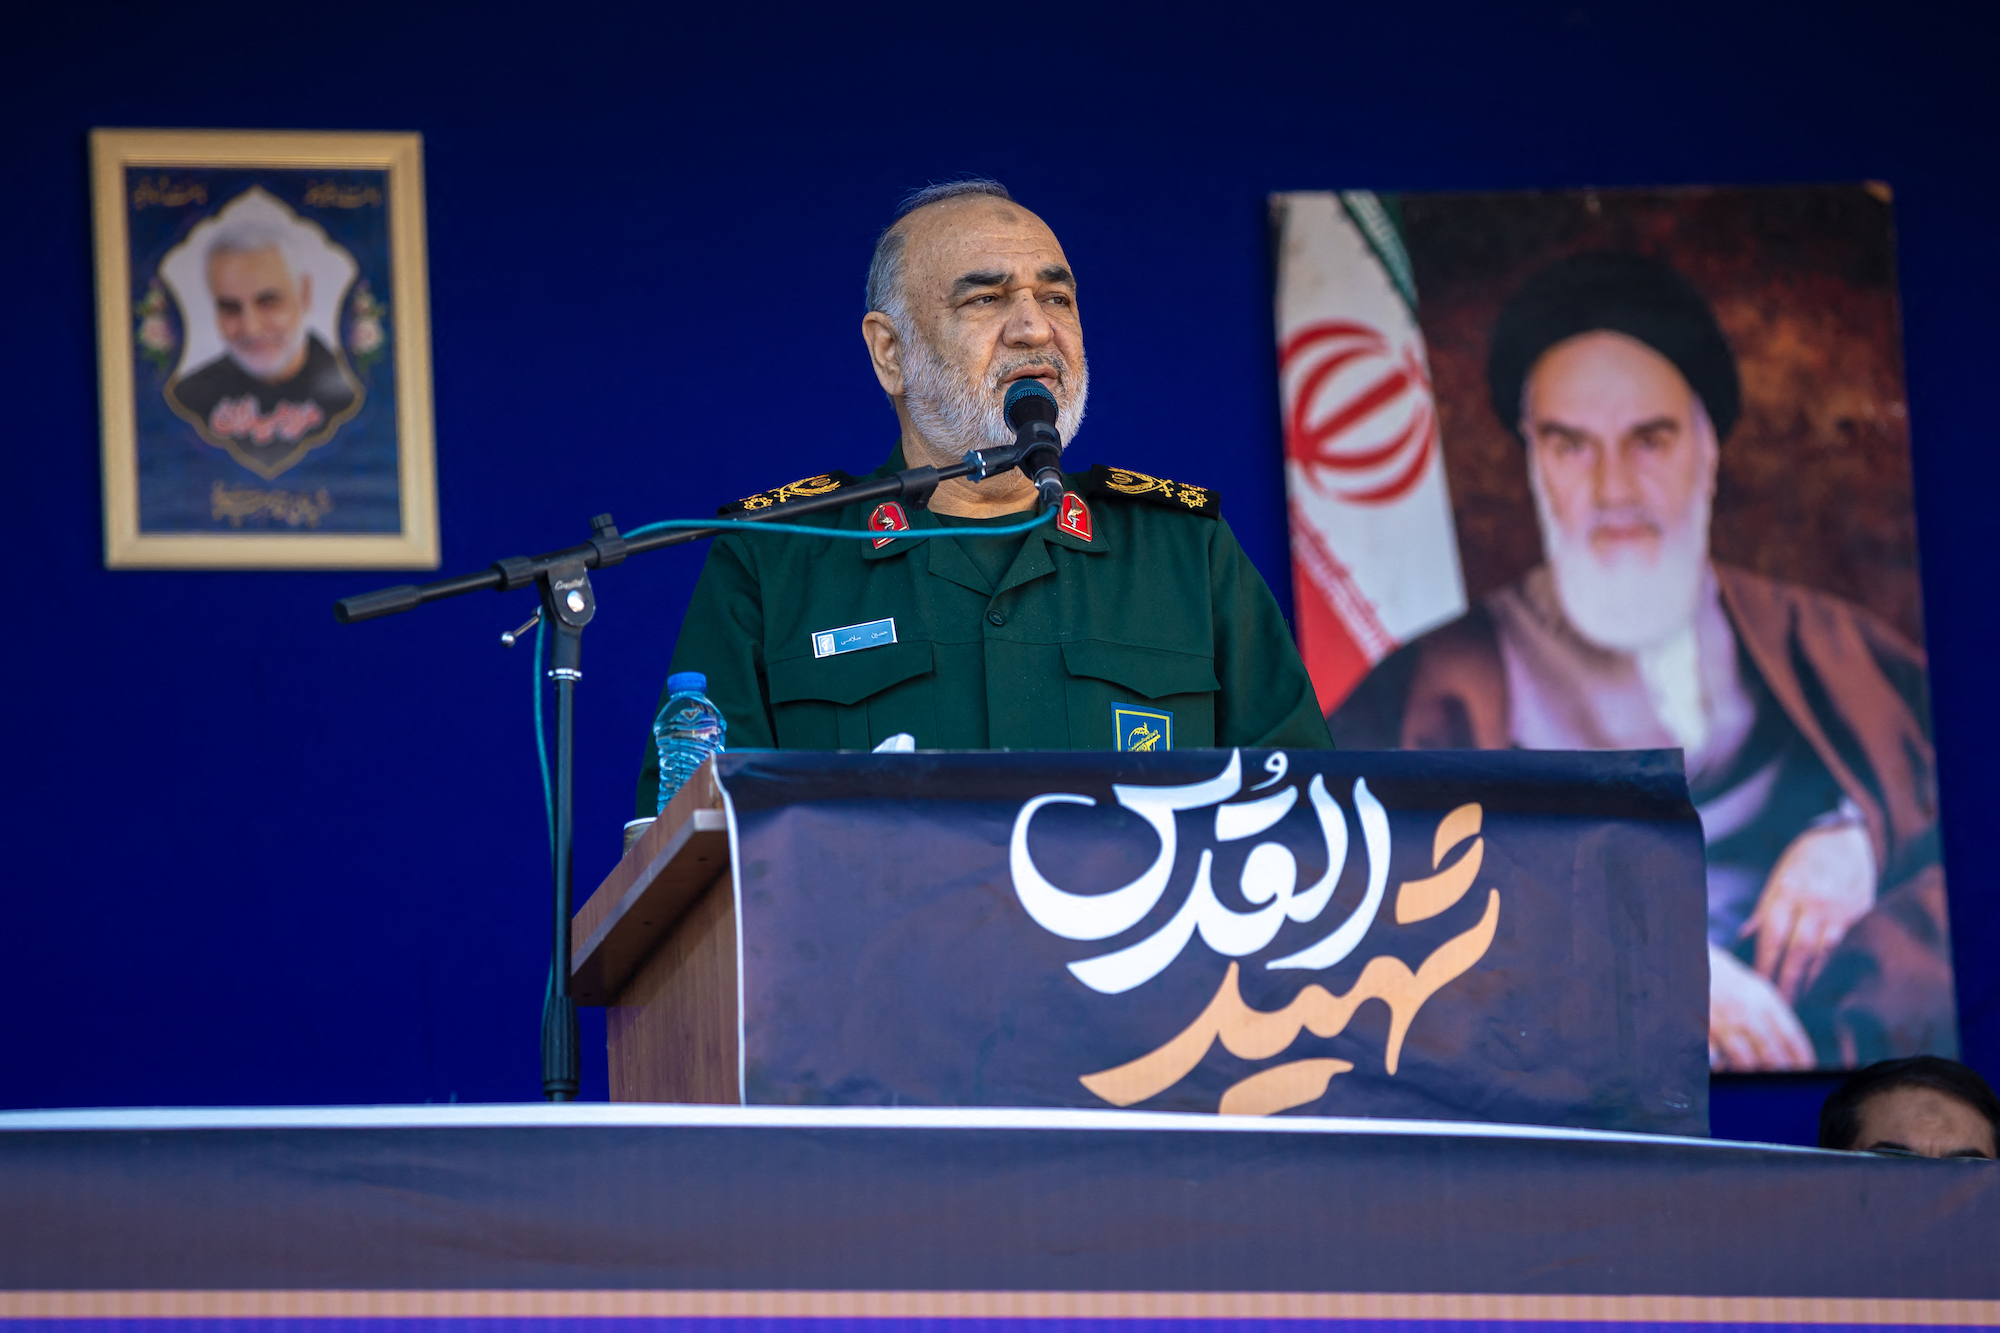 Hossein Salami, commander-in-chief of the Islamic Revolutionary Guard Corps delivers a speech in Kerman, Iran, on January 5.